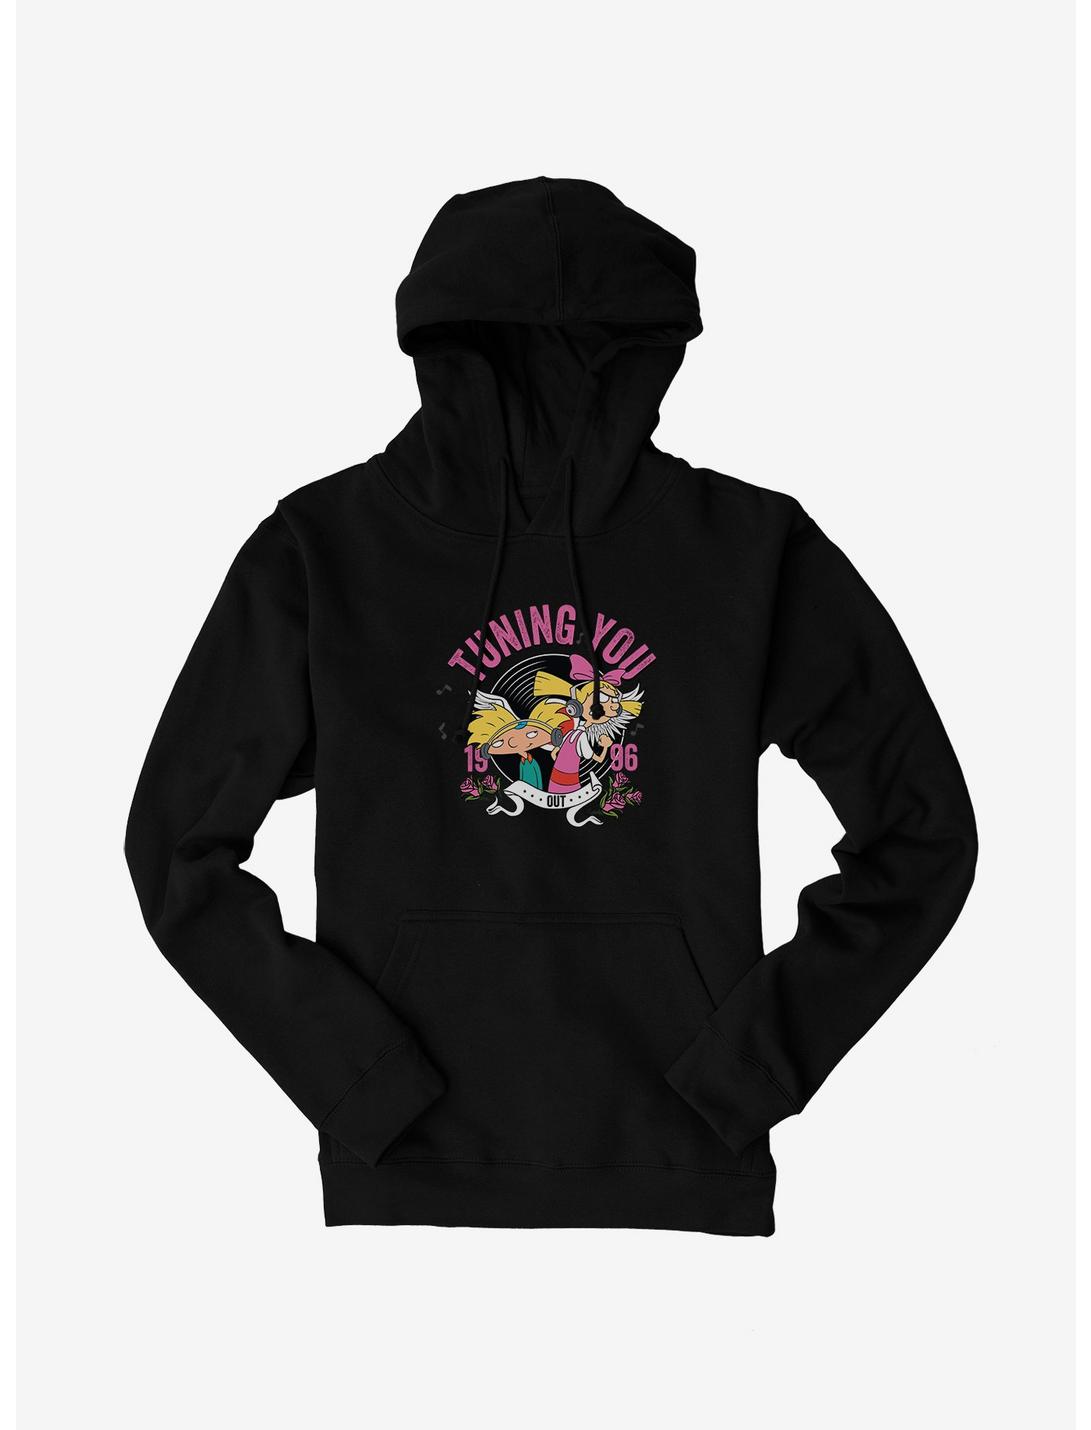 Hey Arnold! Tuning You Out 1996 Hoodie, BLACK, hi-res